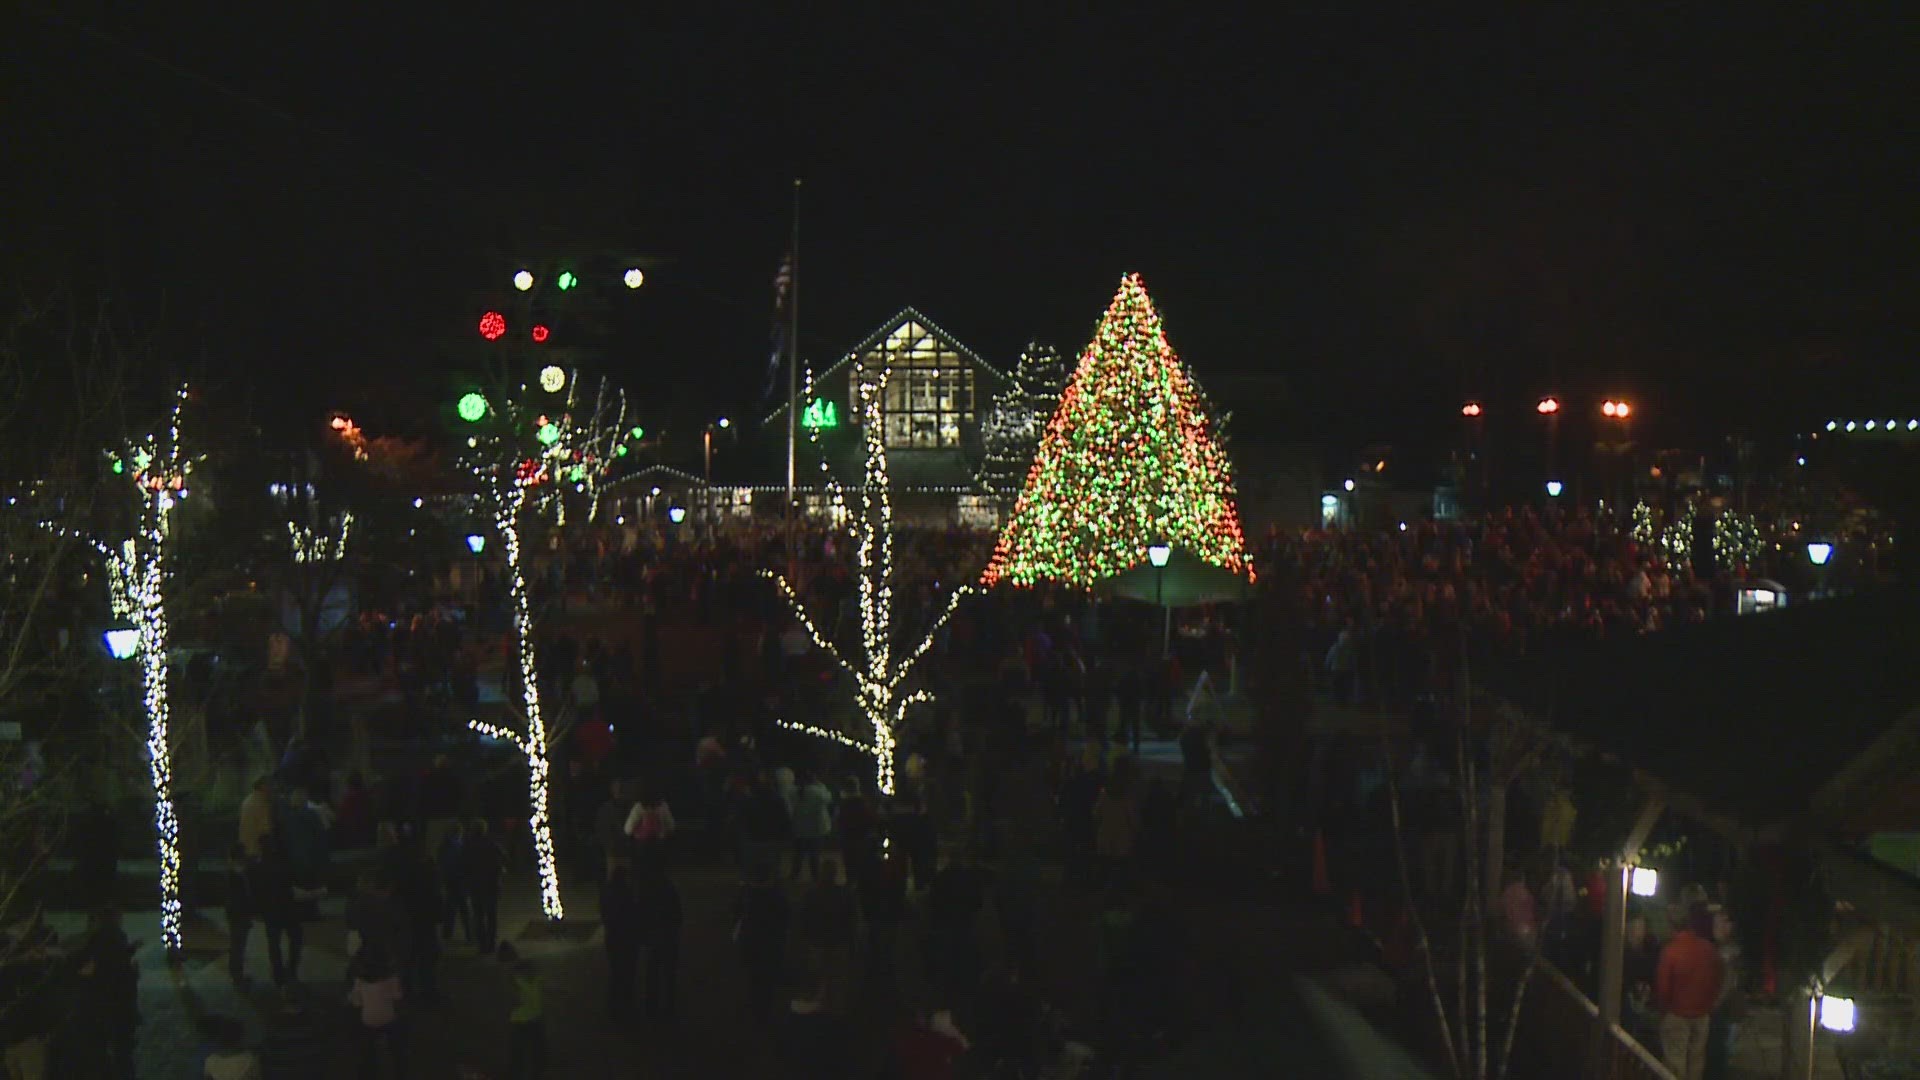 This year, the tree lighting is dedicated to honoring the victims and families of the mass shooting in Lewiston.